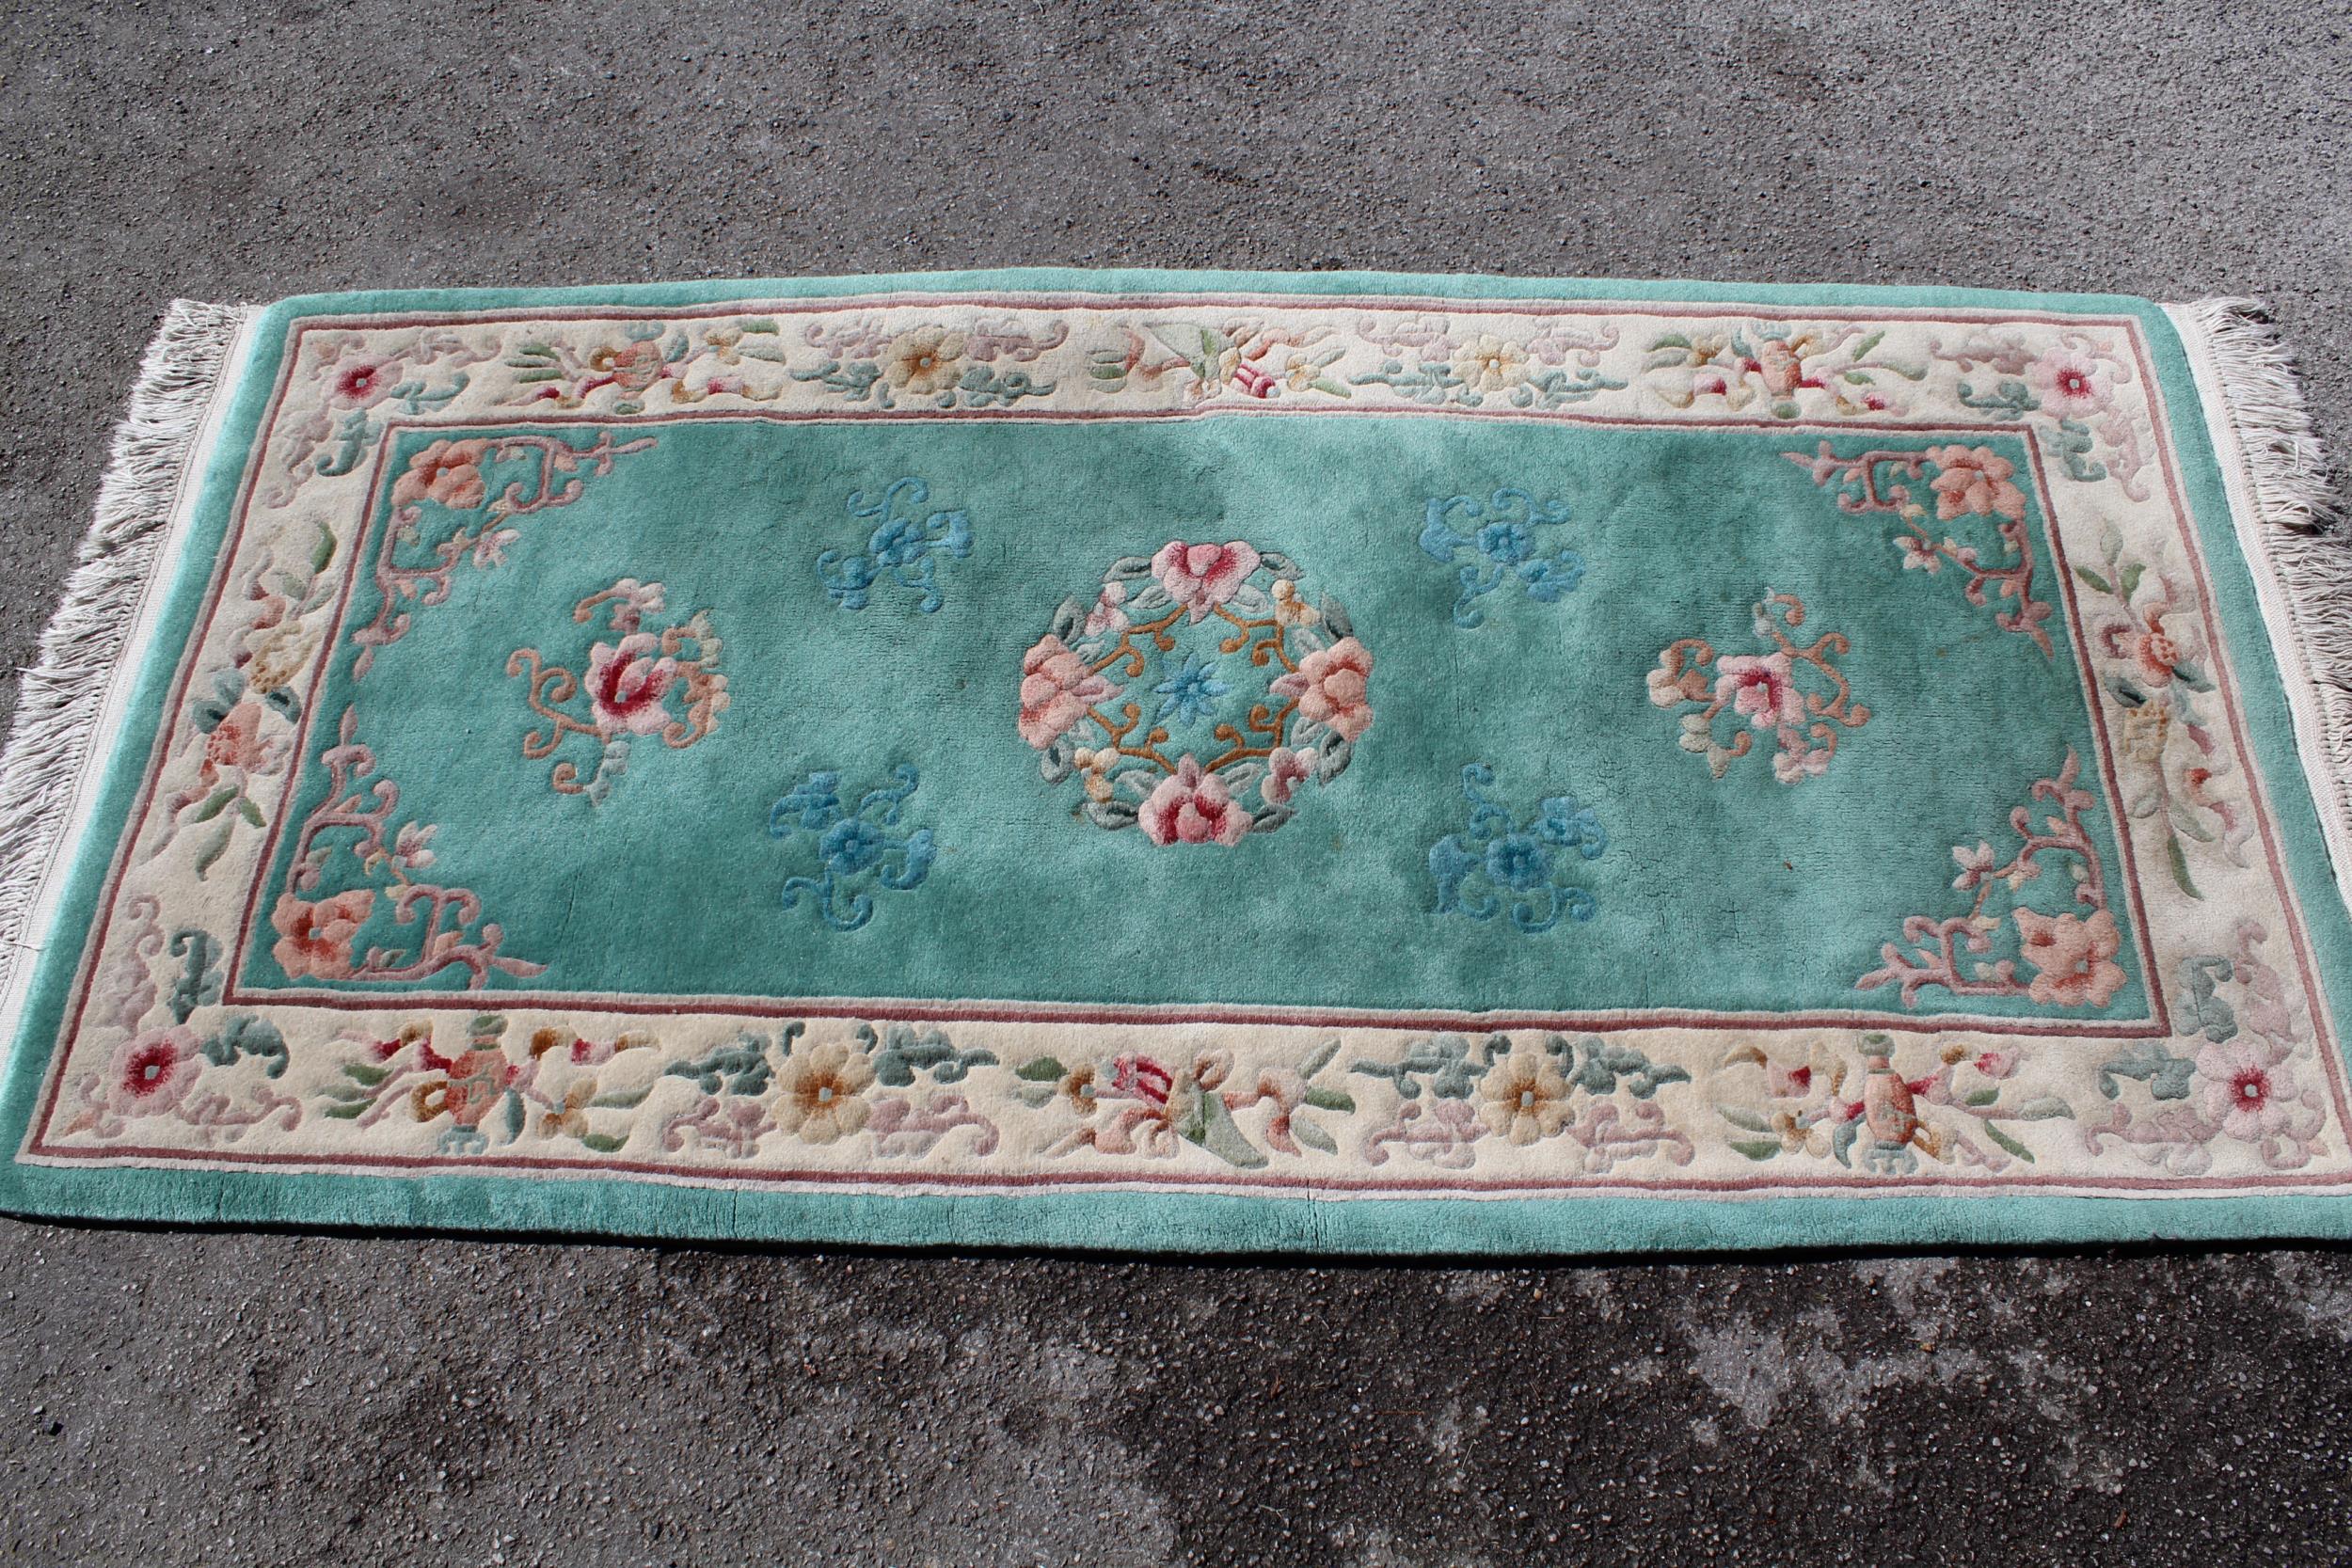 Modern rectangular Chinese rug with all-over floral design and borders on a green ground, 93cms x - Image 2 of 2